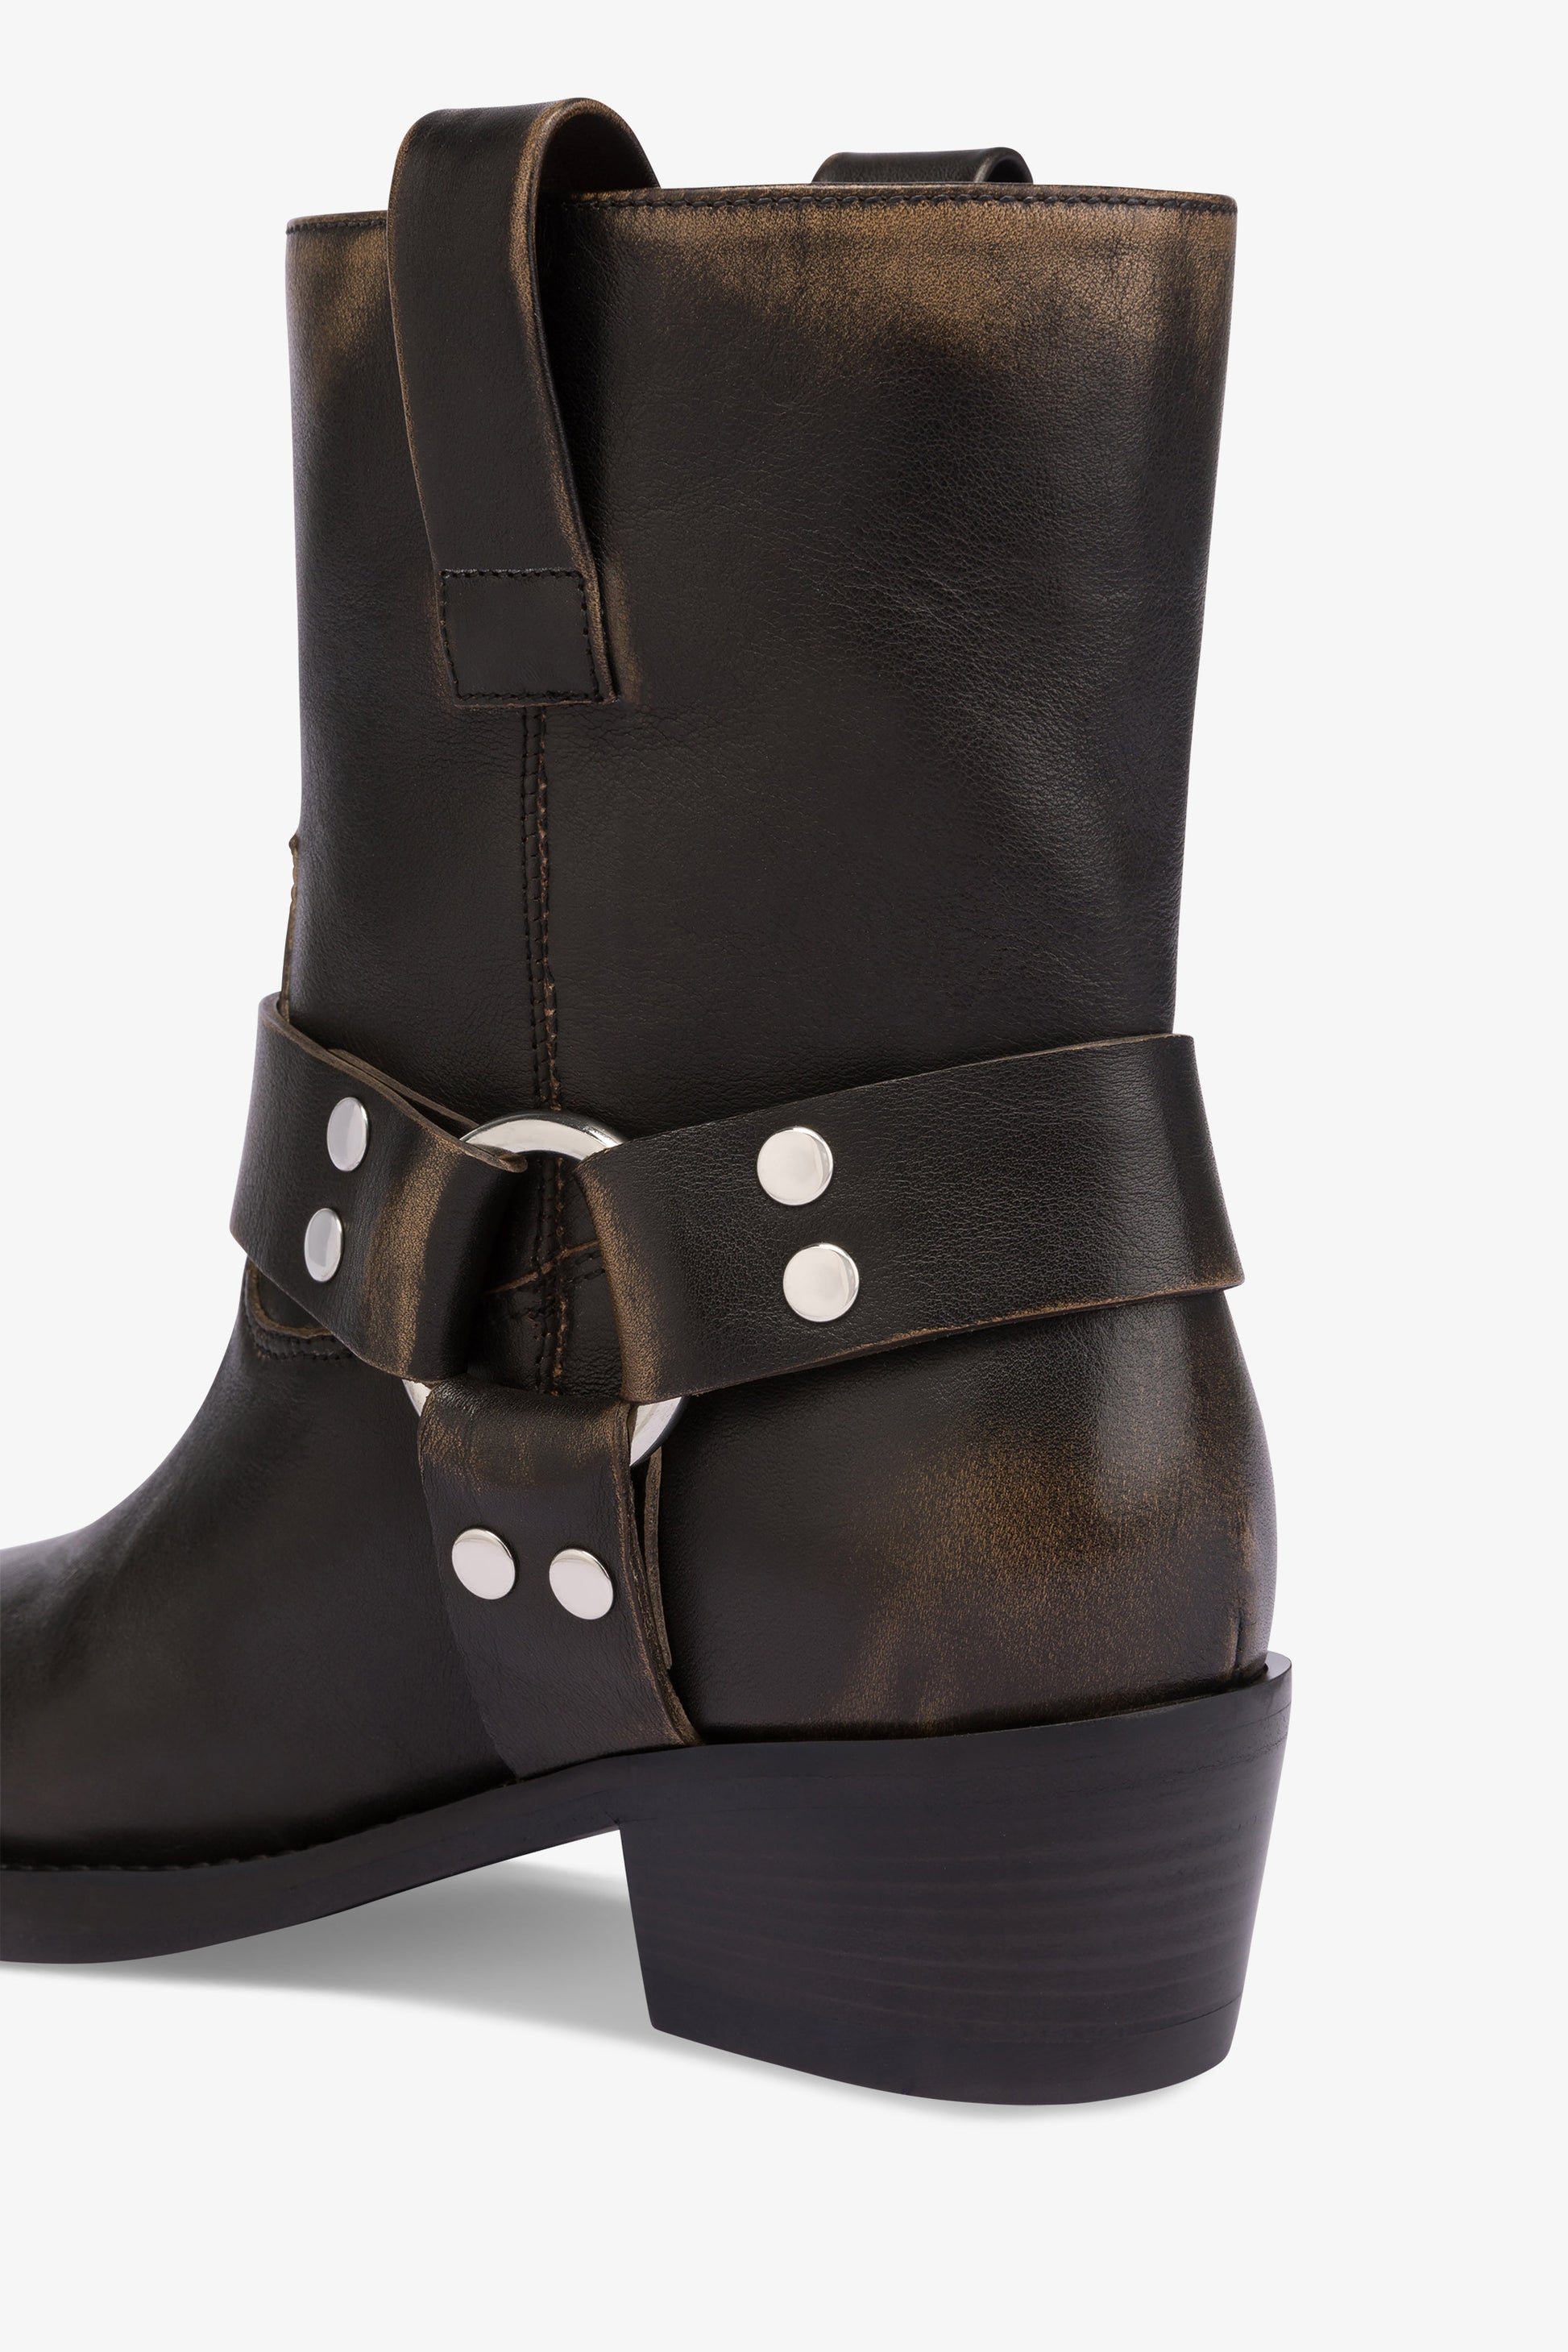 Square-toe ankle boots in soft black brushed leather